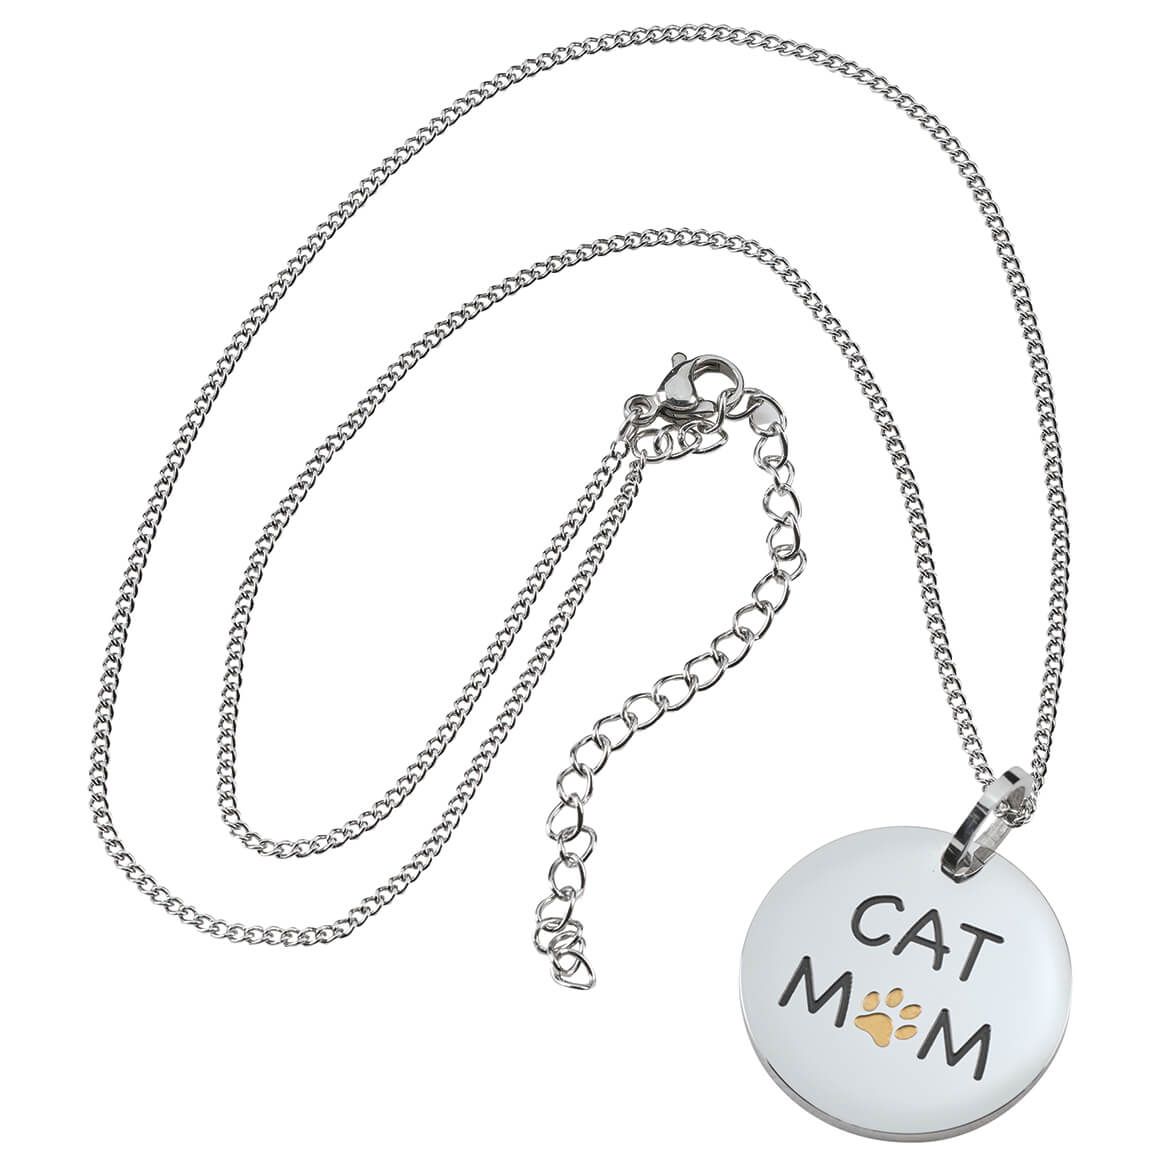 Personalized Cat Mom Necklace + '-' + 375738